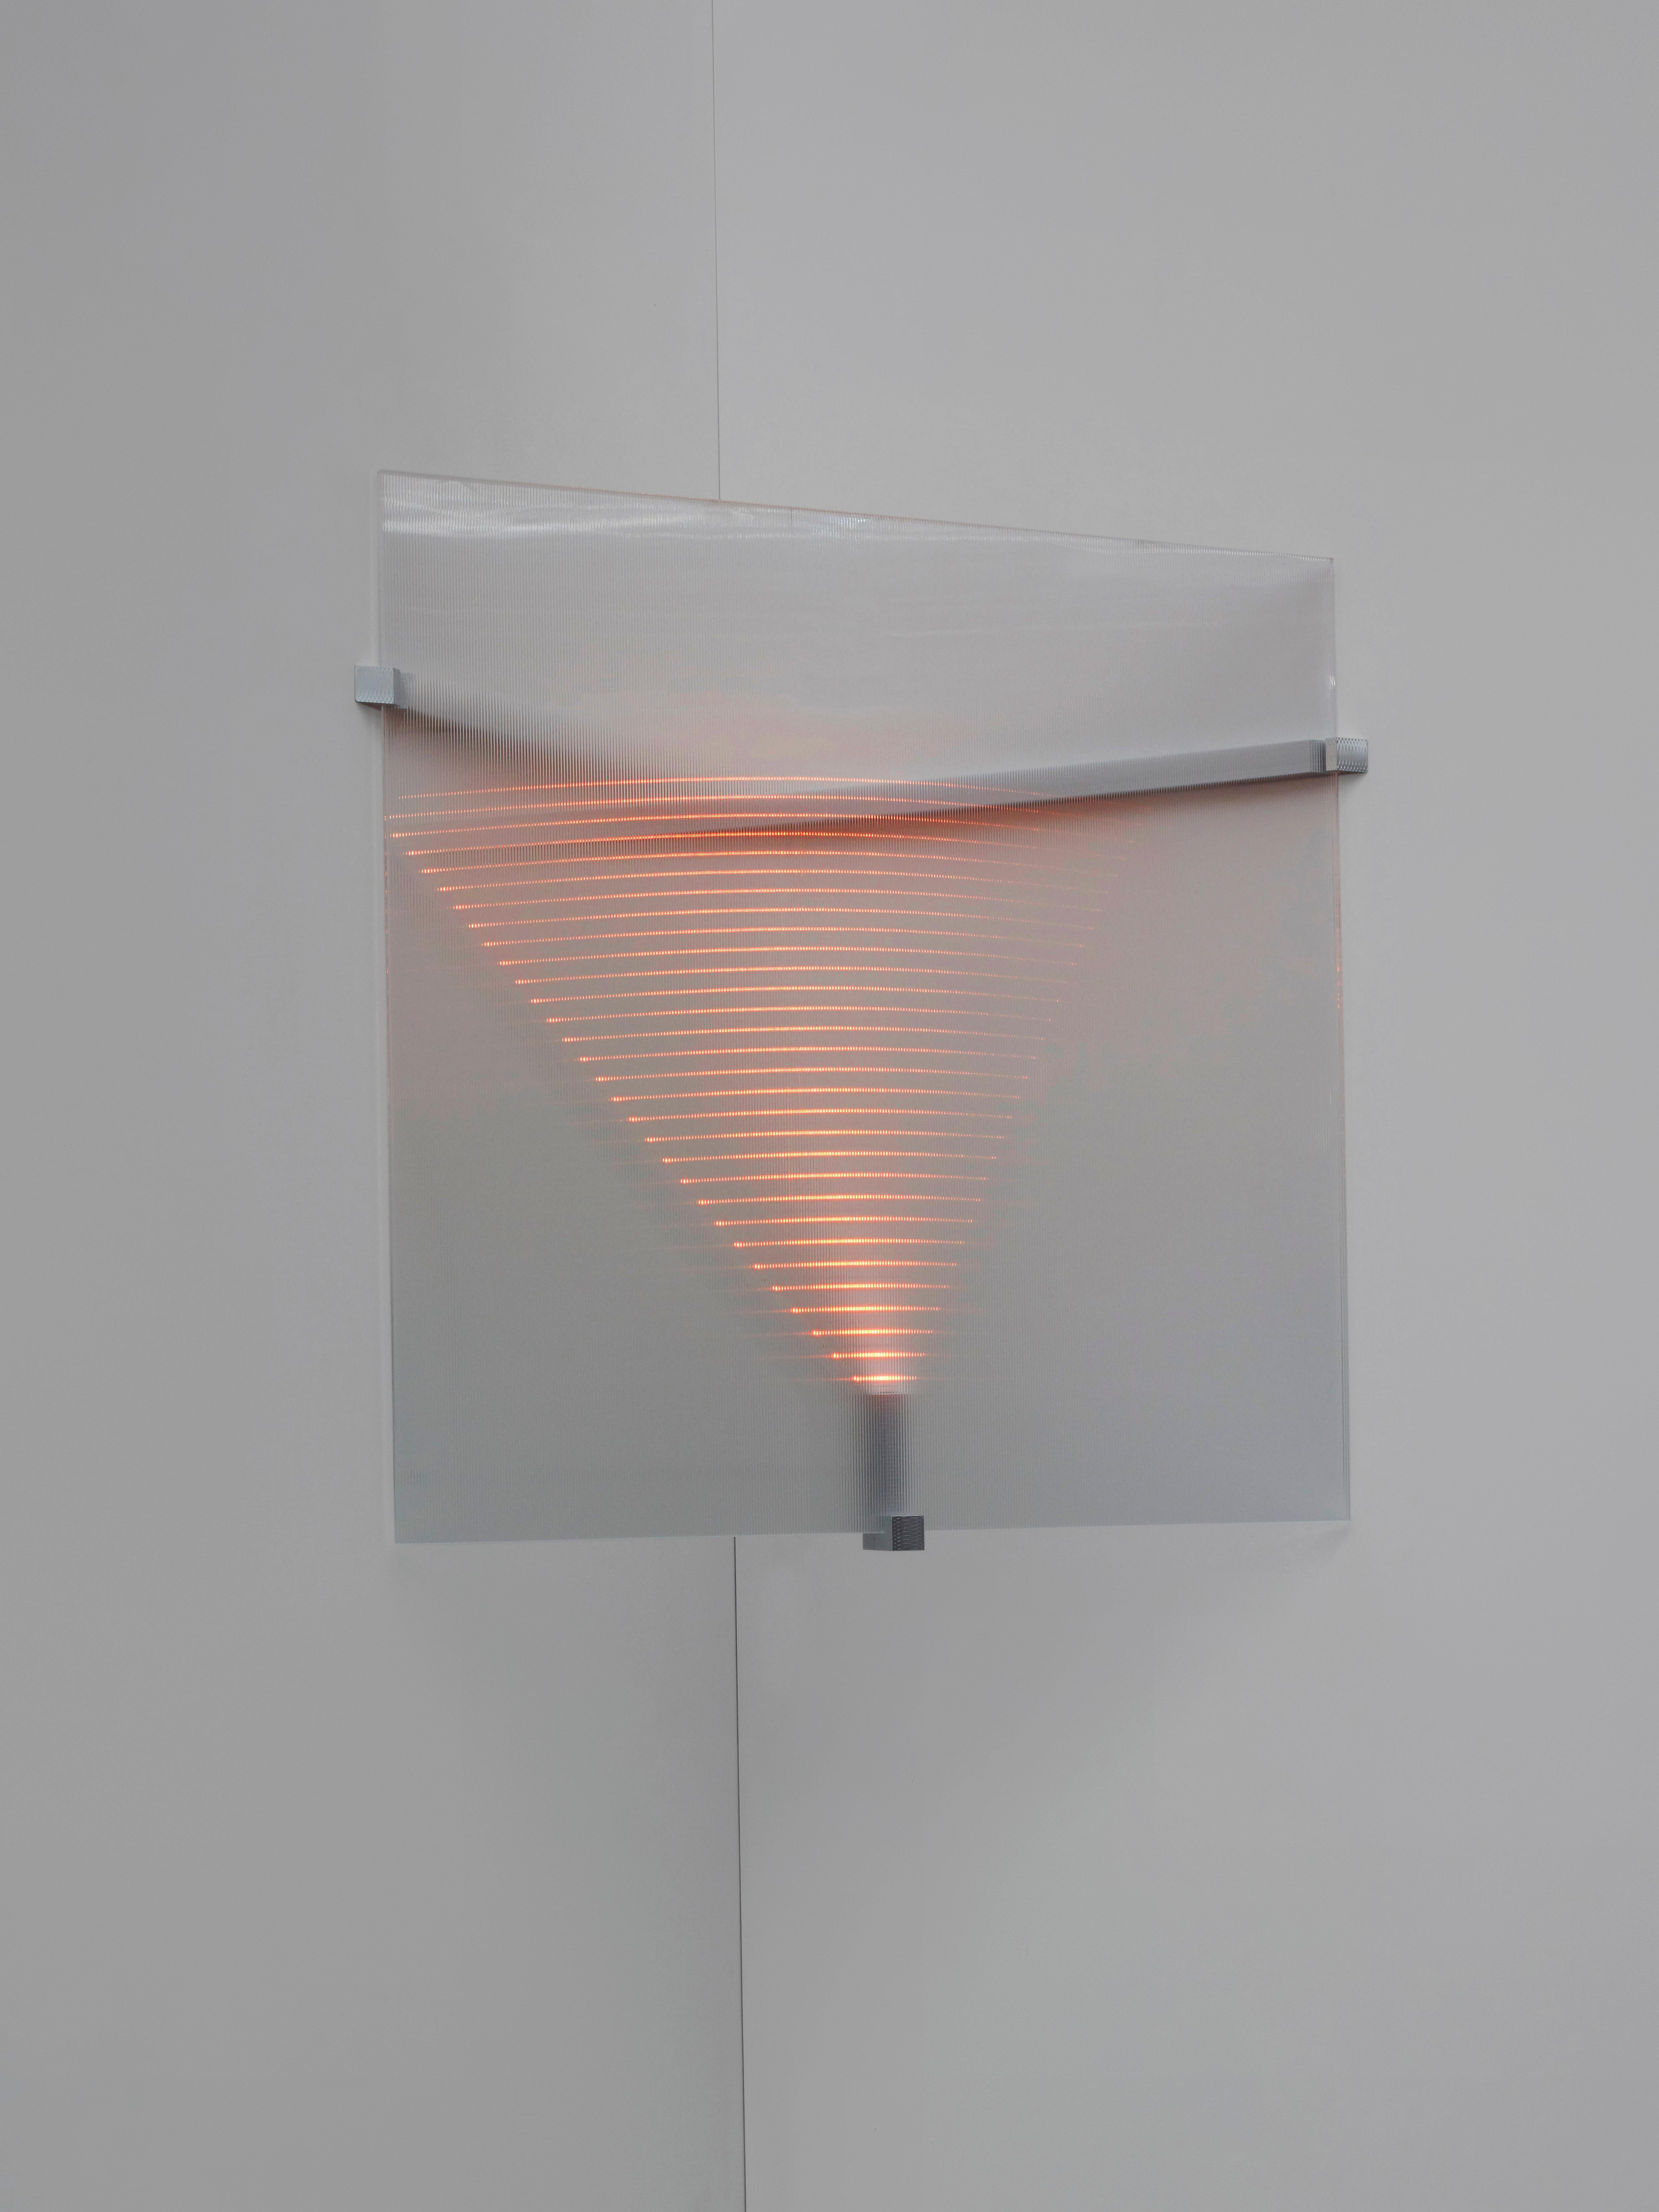 Every lamp encapsulates a shape of light that changes depending on your position in space. Faced head on you see a geometrical pattern, but seen from an angle the shape distorts and its depth accelerates. The led points function not only as a source